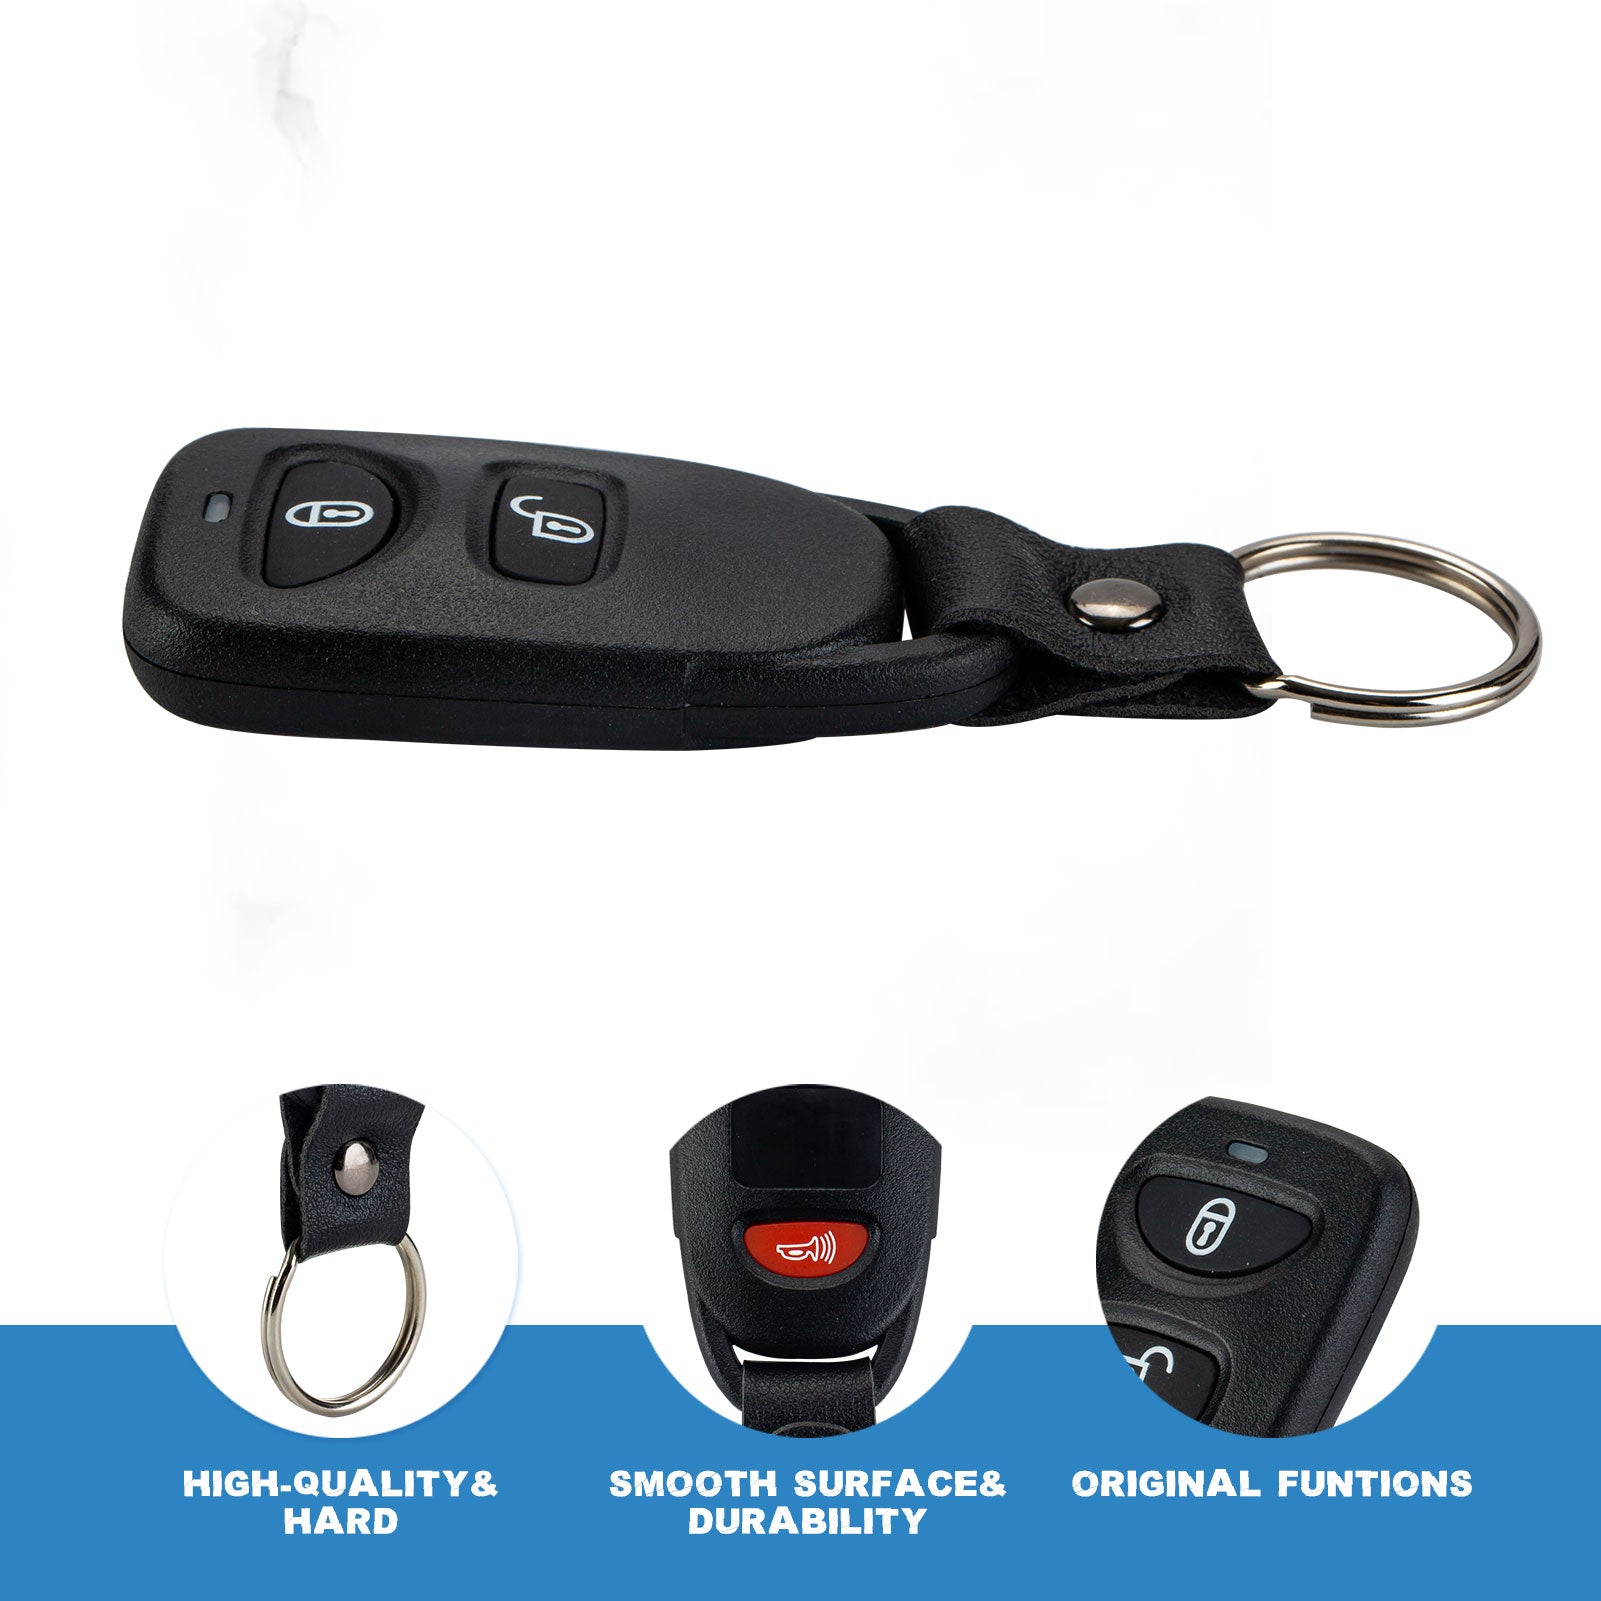 Replacement for Keyless Entry Remote fit for KIA 2009-2011, Rio 2009-2013 Sorento PINHA-T036